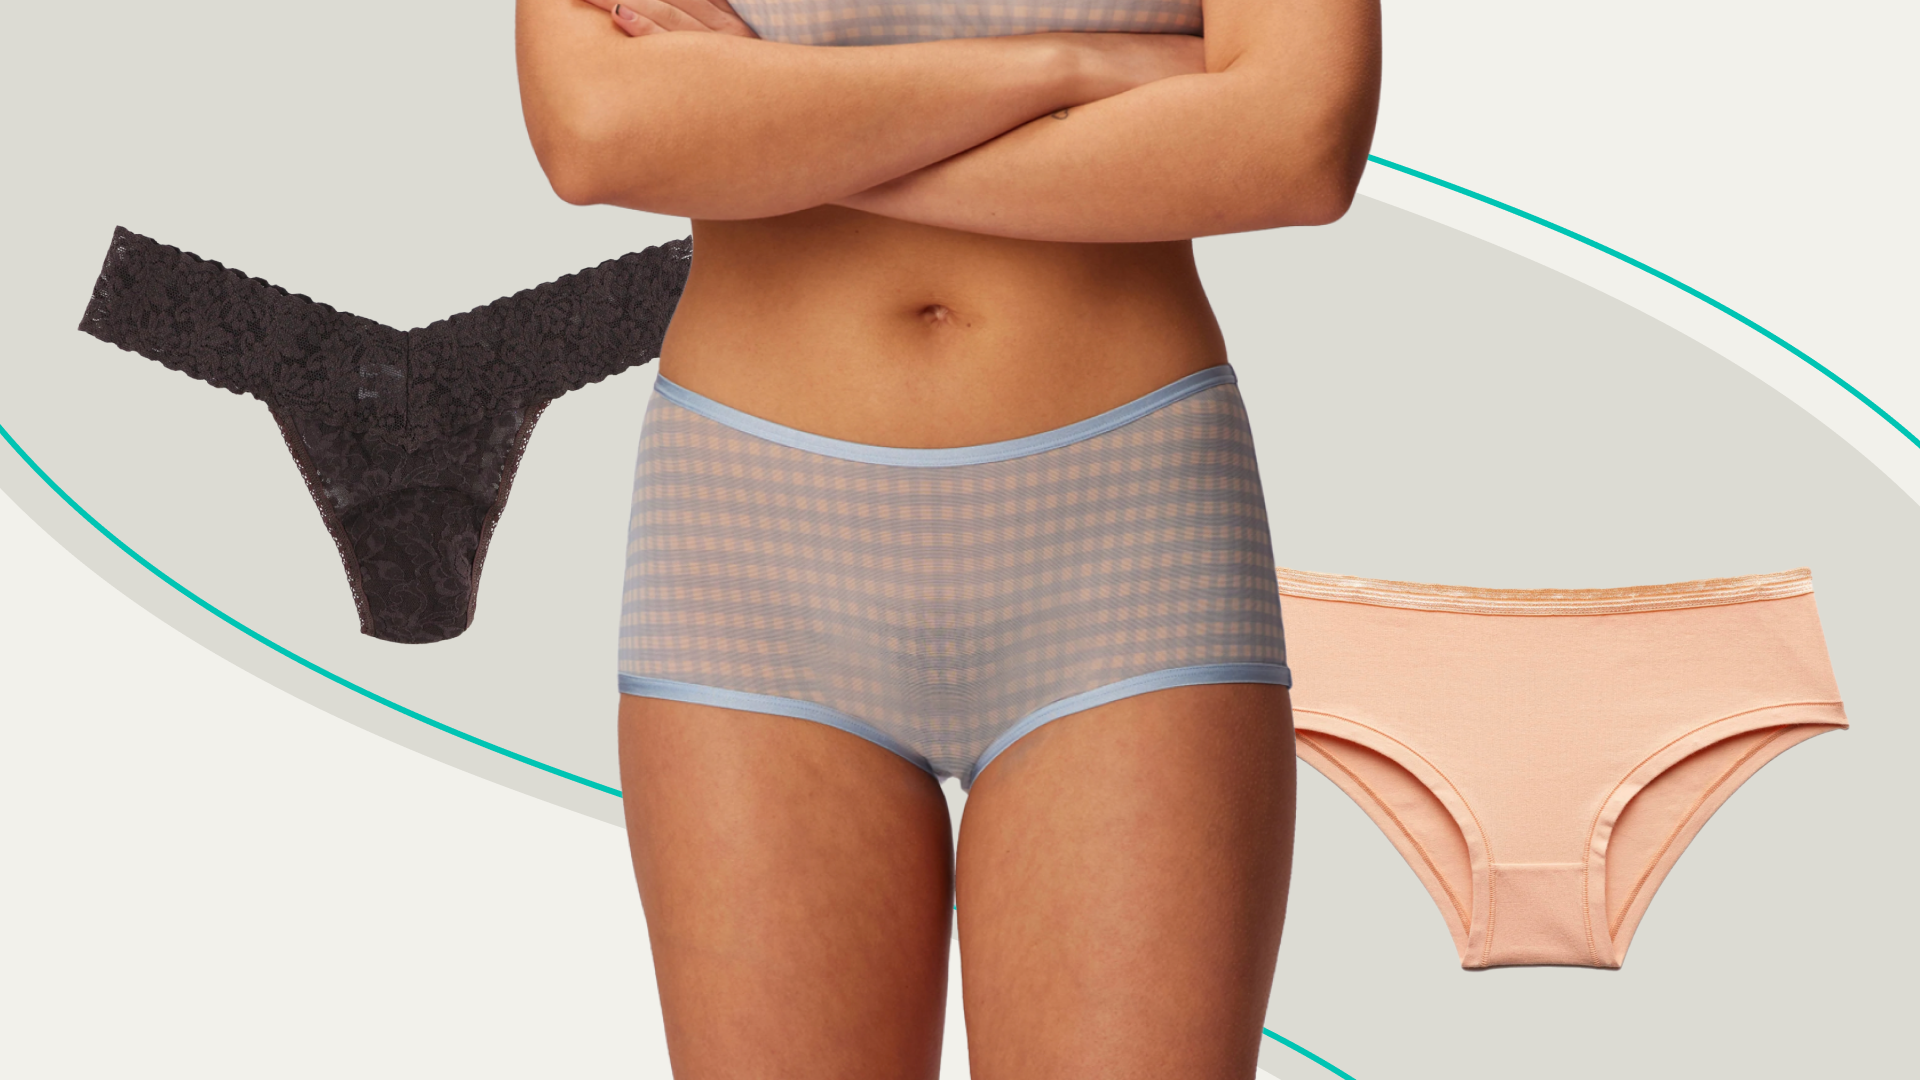 p a c t - Organic cotton undies because you and your body